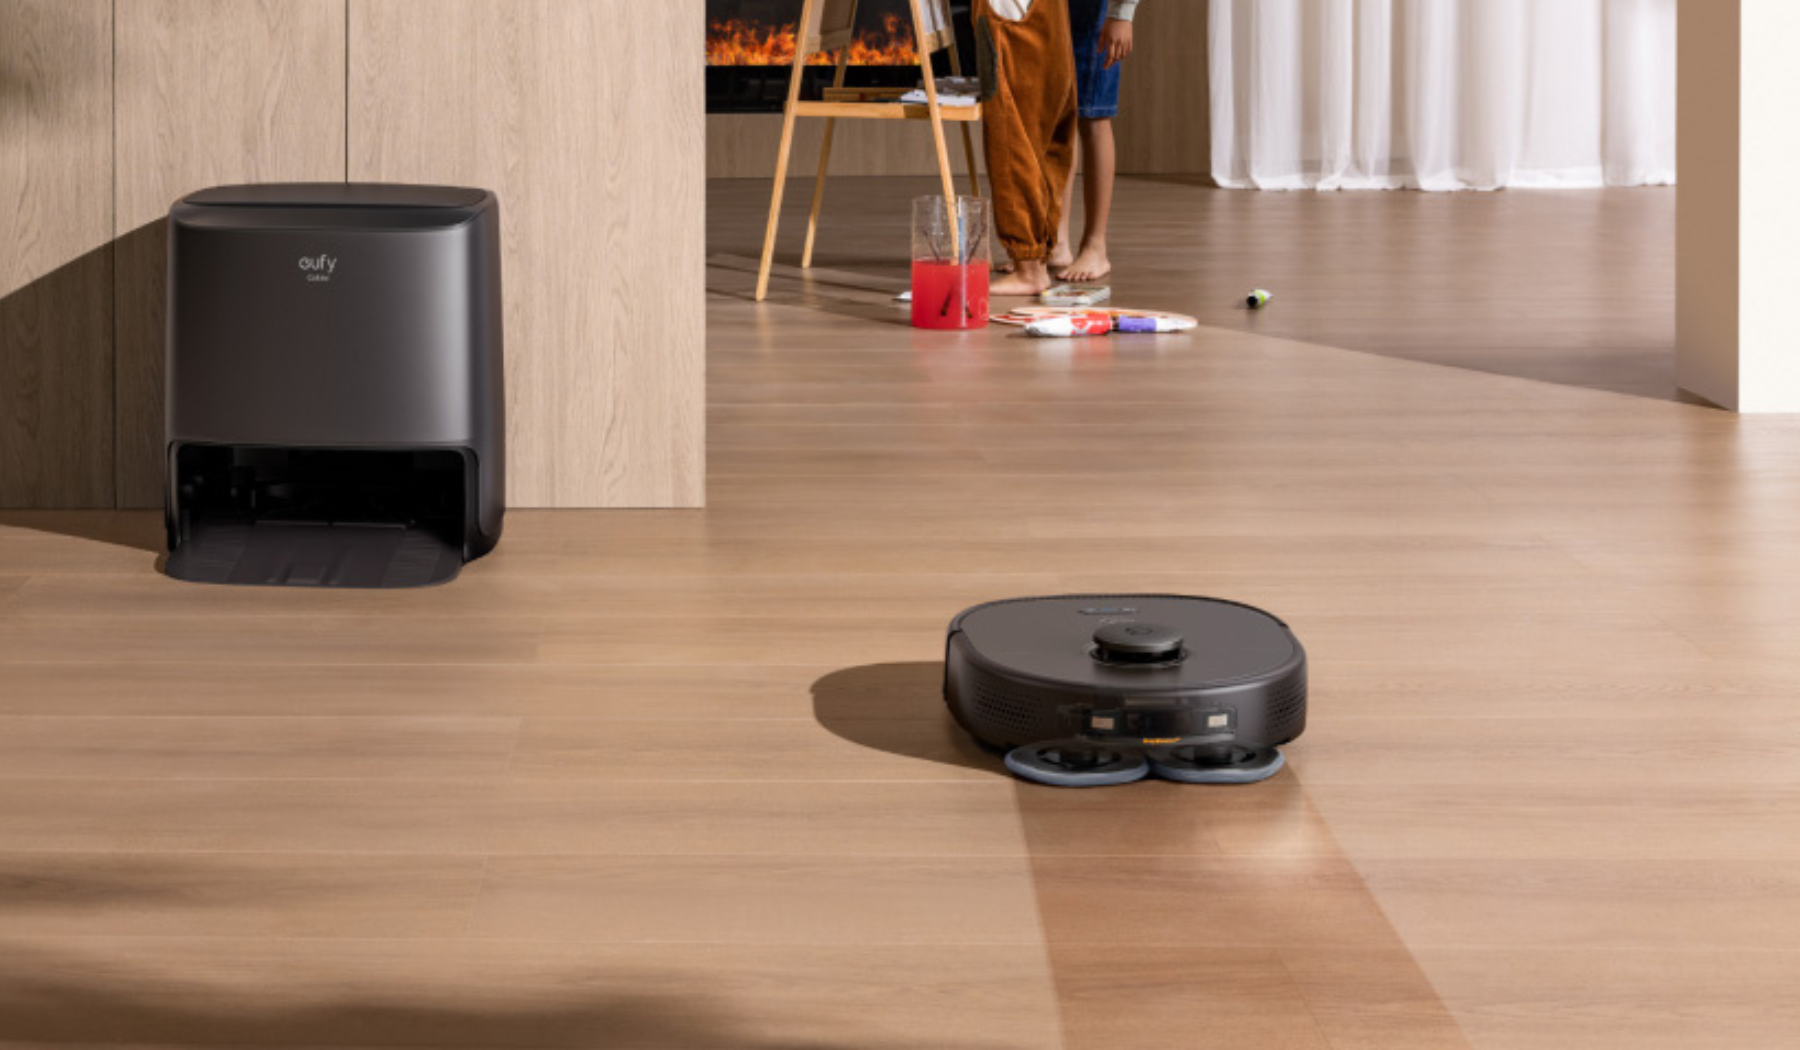 Robot vacuum deals at Amazon are booming pre-Prime Day